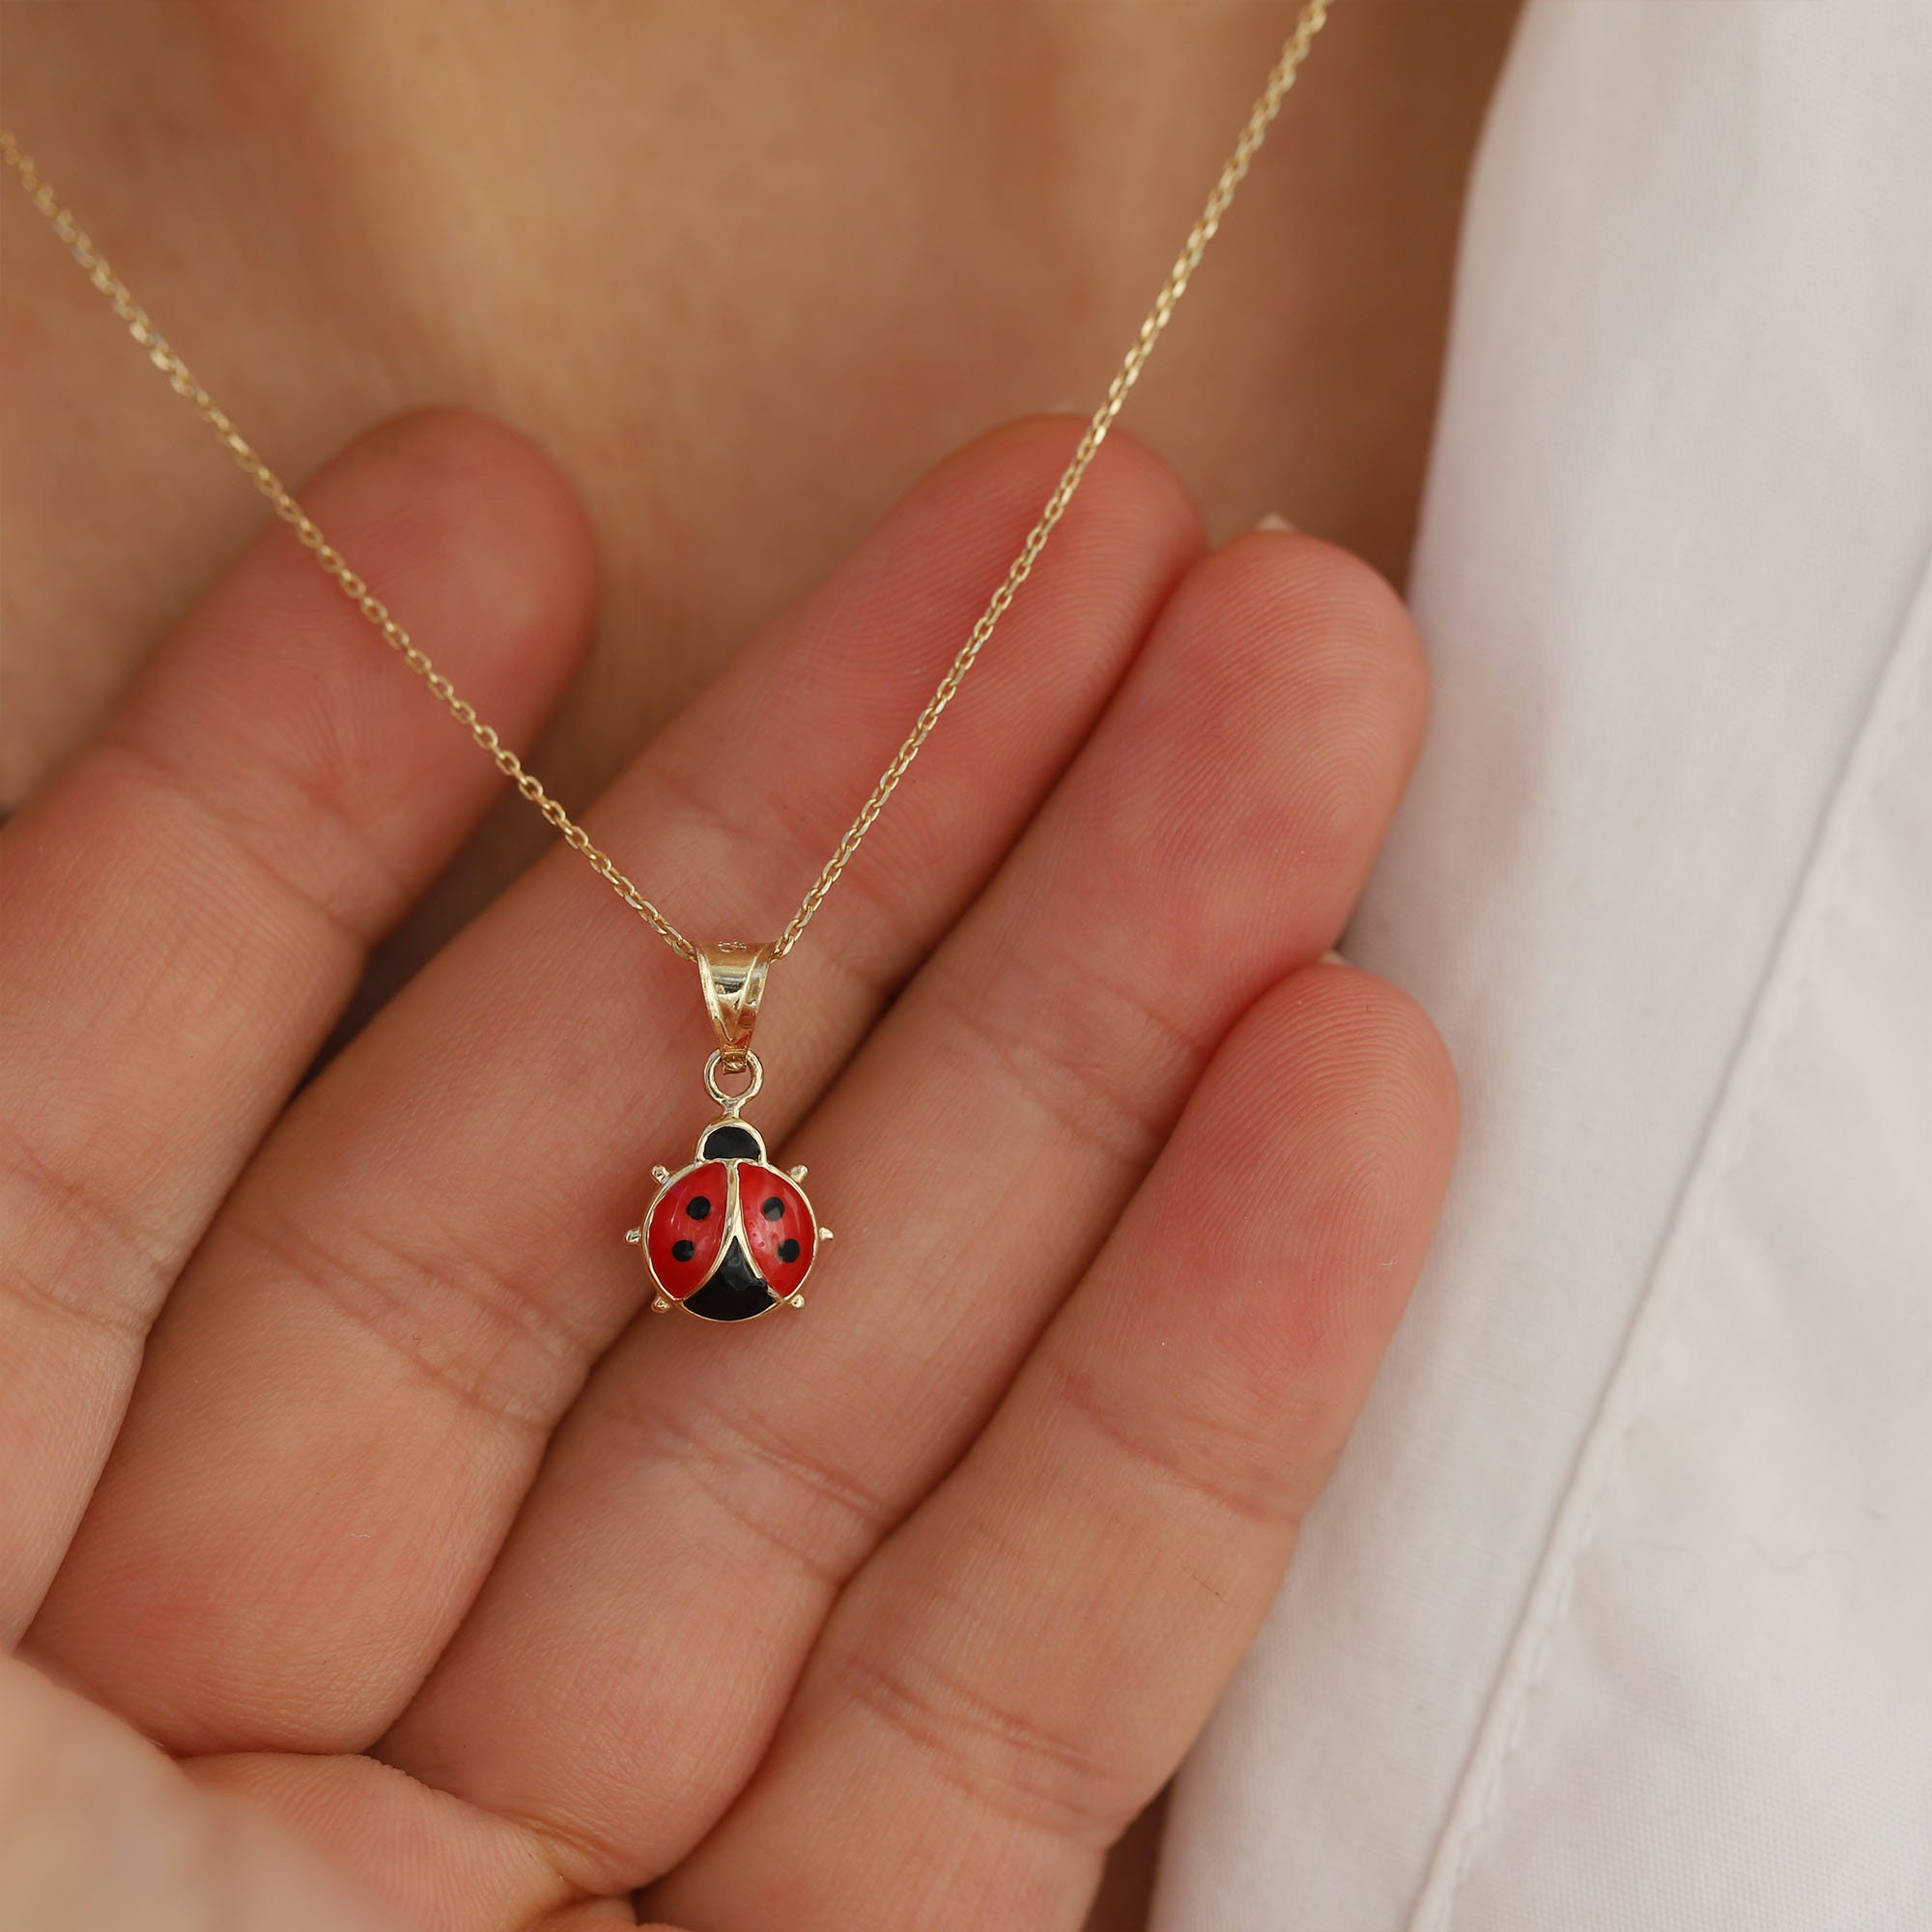 Buy Handcrafted 22k Gold Plated Brass Ladybug Necklace - Golden & Red  Online at the Best Price in India - Loopify